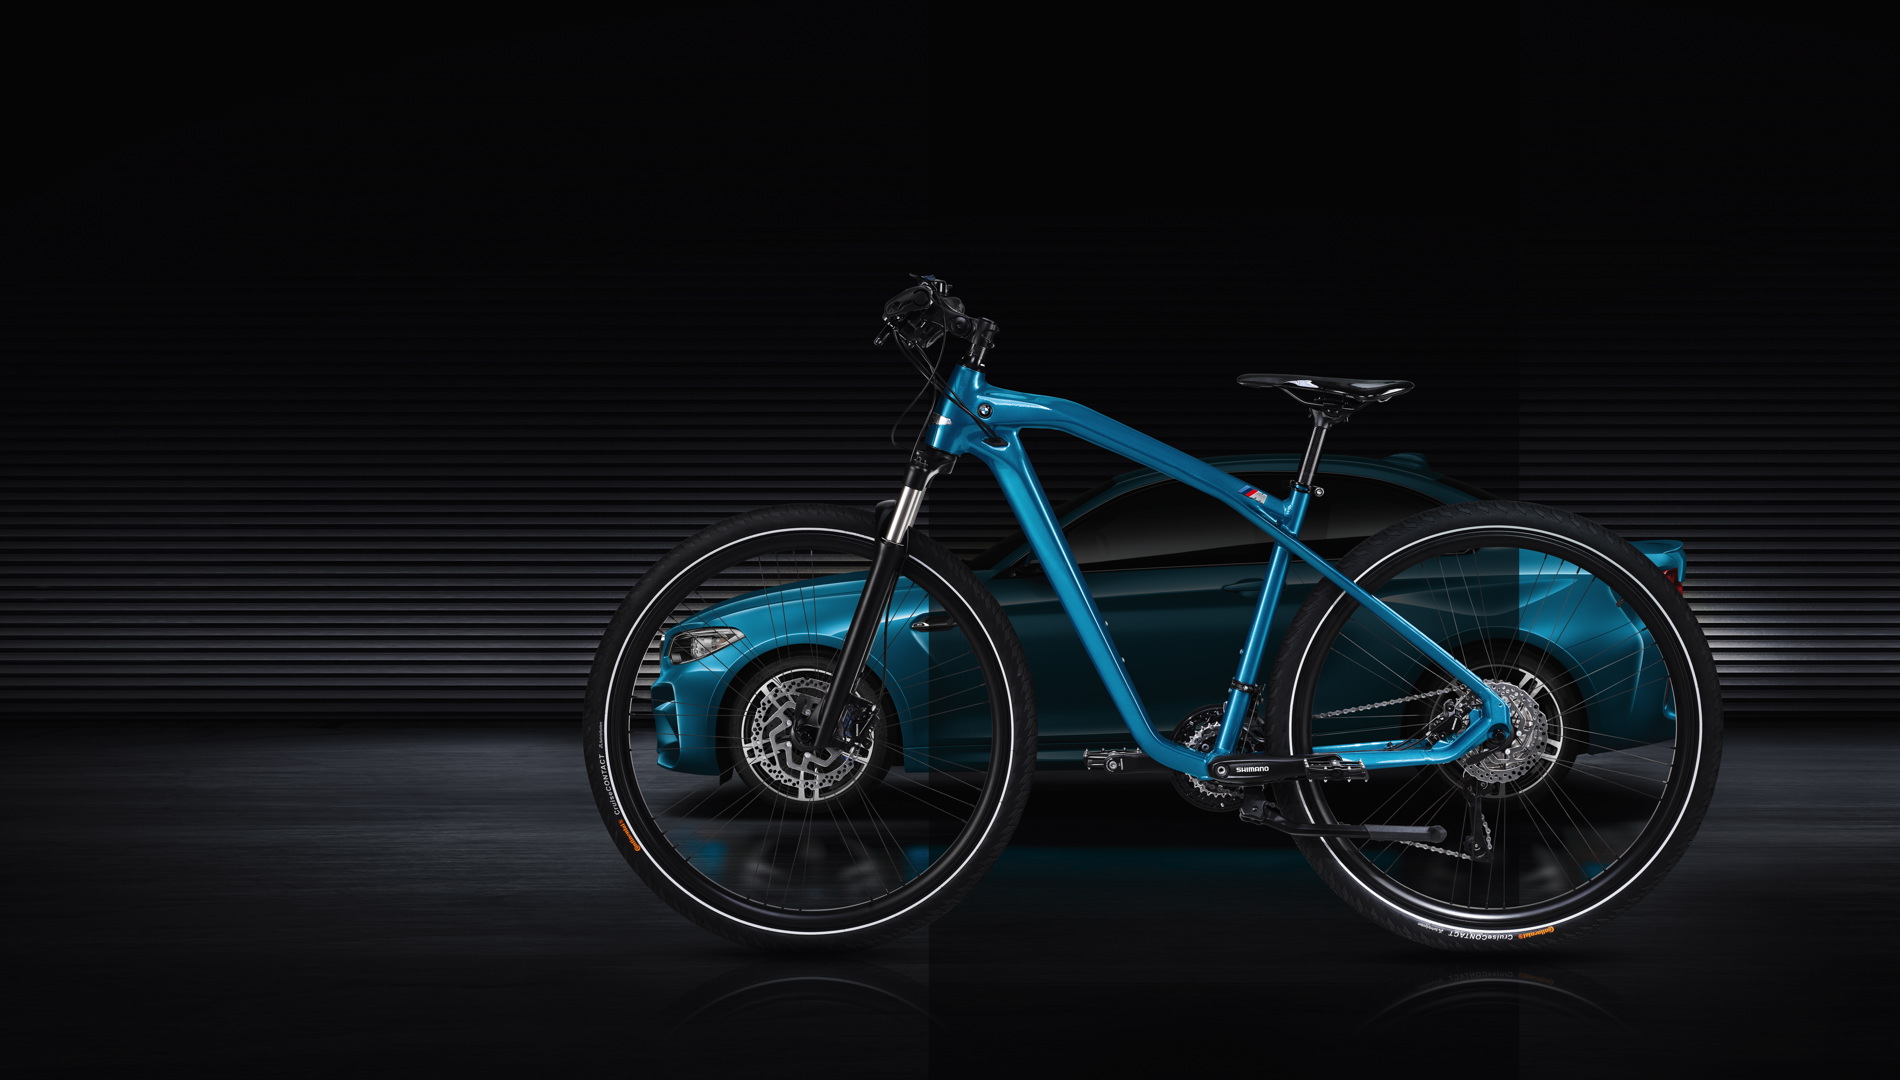 leg mischief Wink The BMW Cruise M limited edition bicycle is inspired by the M2 Coupe -  Luxurylaunches